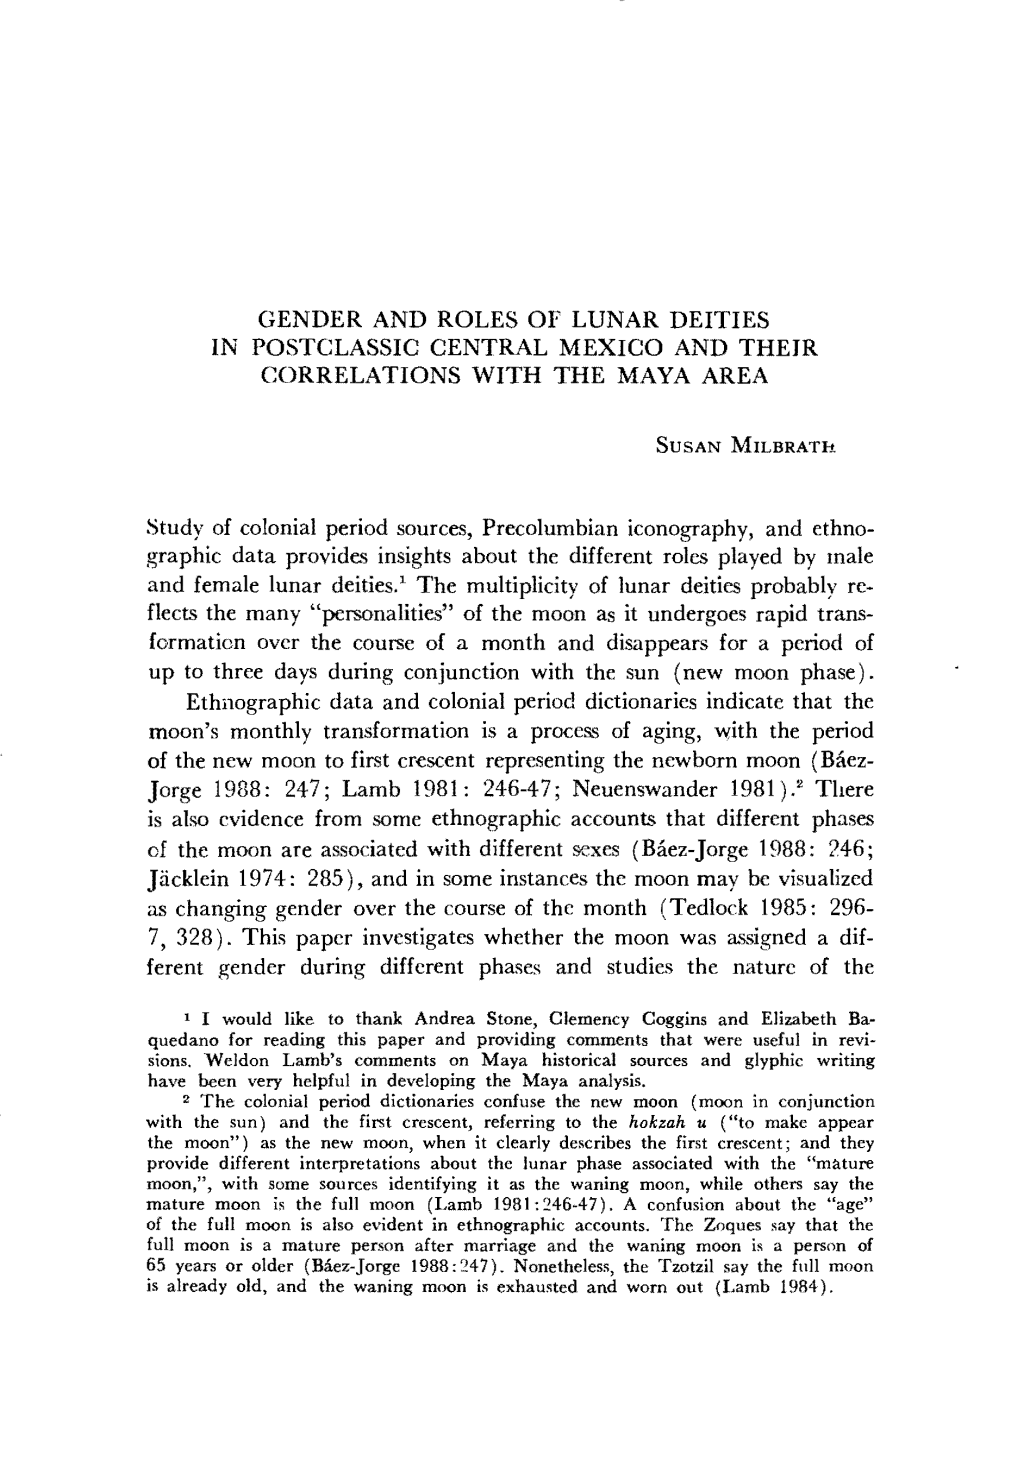 Gender and Roles Oy Lunar Deities in Postclassic Central Mexico and Thejr Correlations with the Maya Area